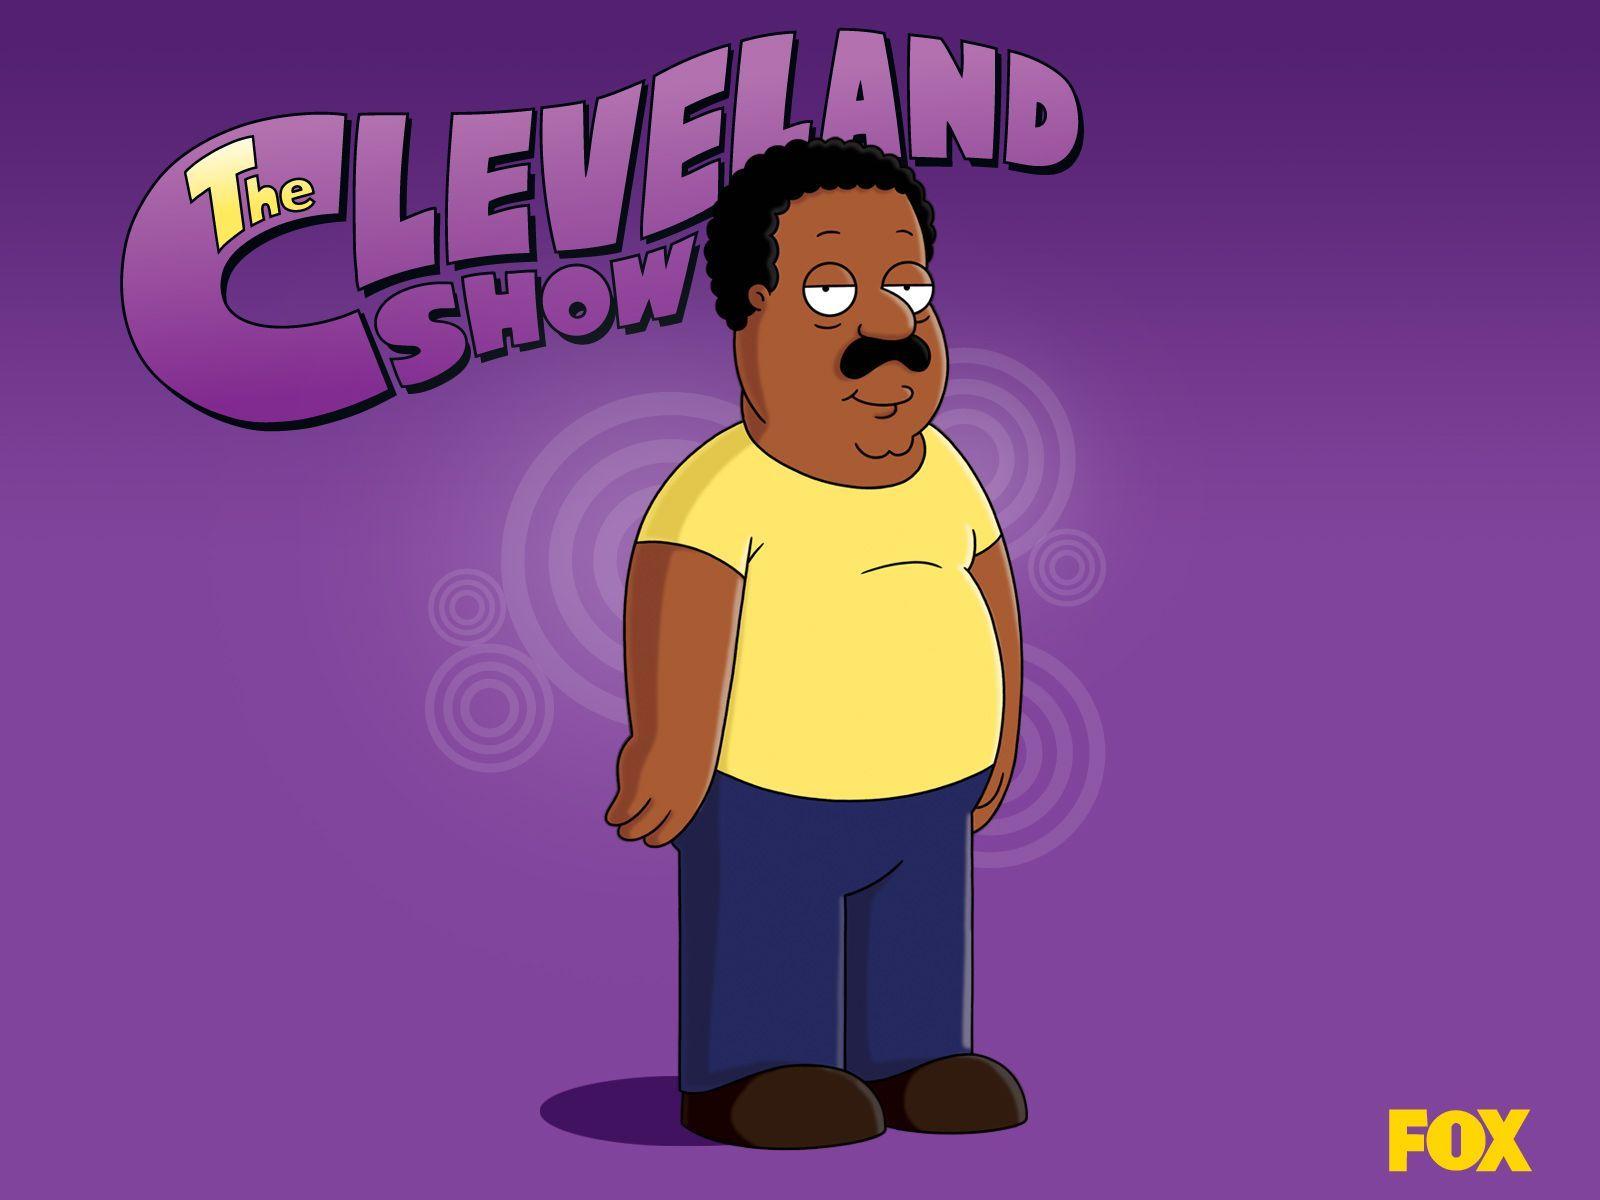 The Cleveland Show TheWallpaper. Free Desktop Wallpaper for HD